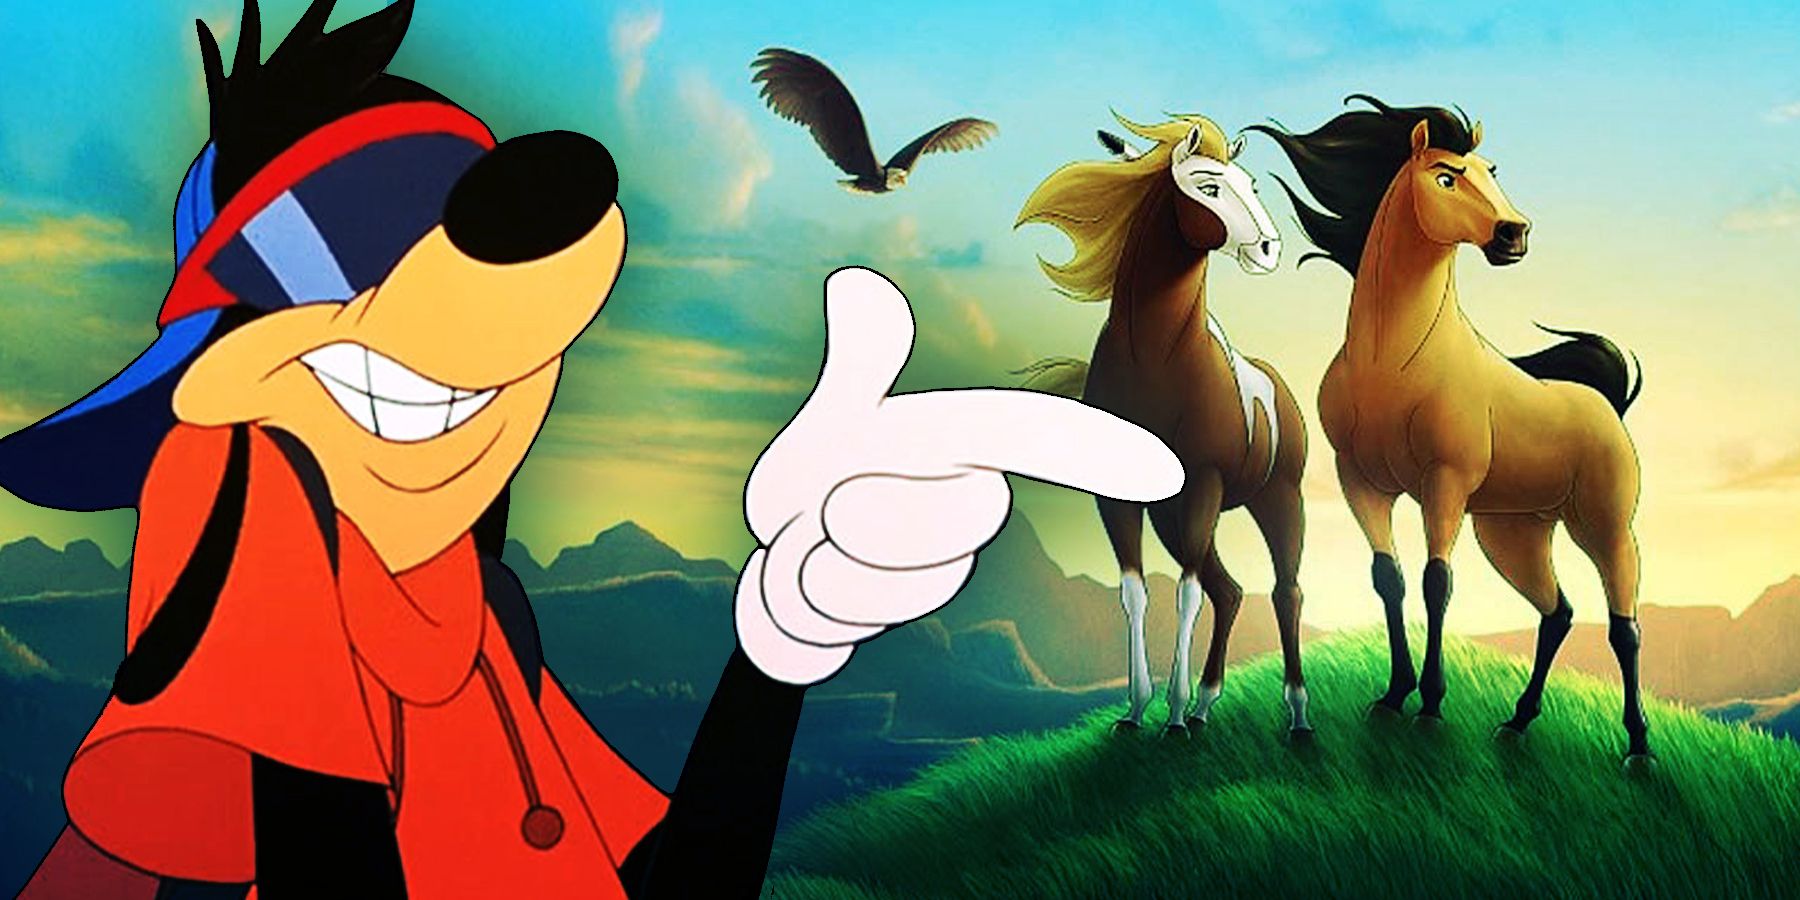 Max Goof from A Goofy Movie and horses Rain and Spirit from movie Spirit: Stallion of the Cimarron